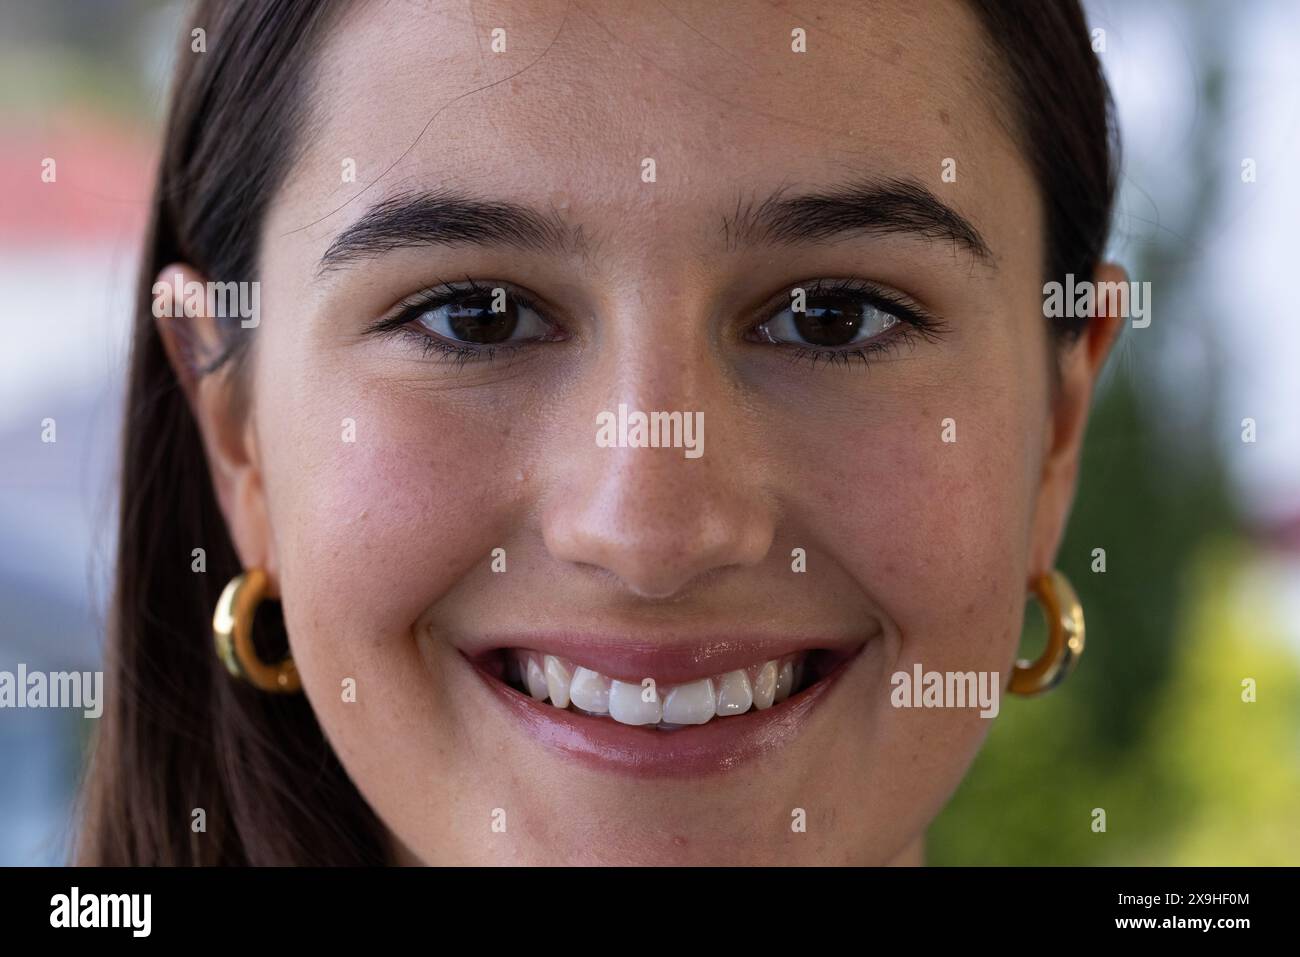 At home, young Caucasian woman smiling with gold hoop earrings. Enjoying a relaxing day at home spa with a serene outdoor view in background, feeling Stock Photo